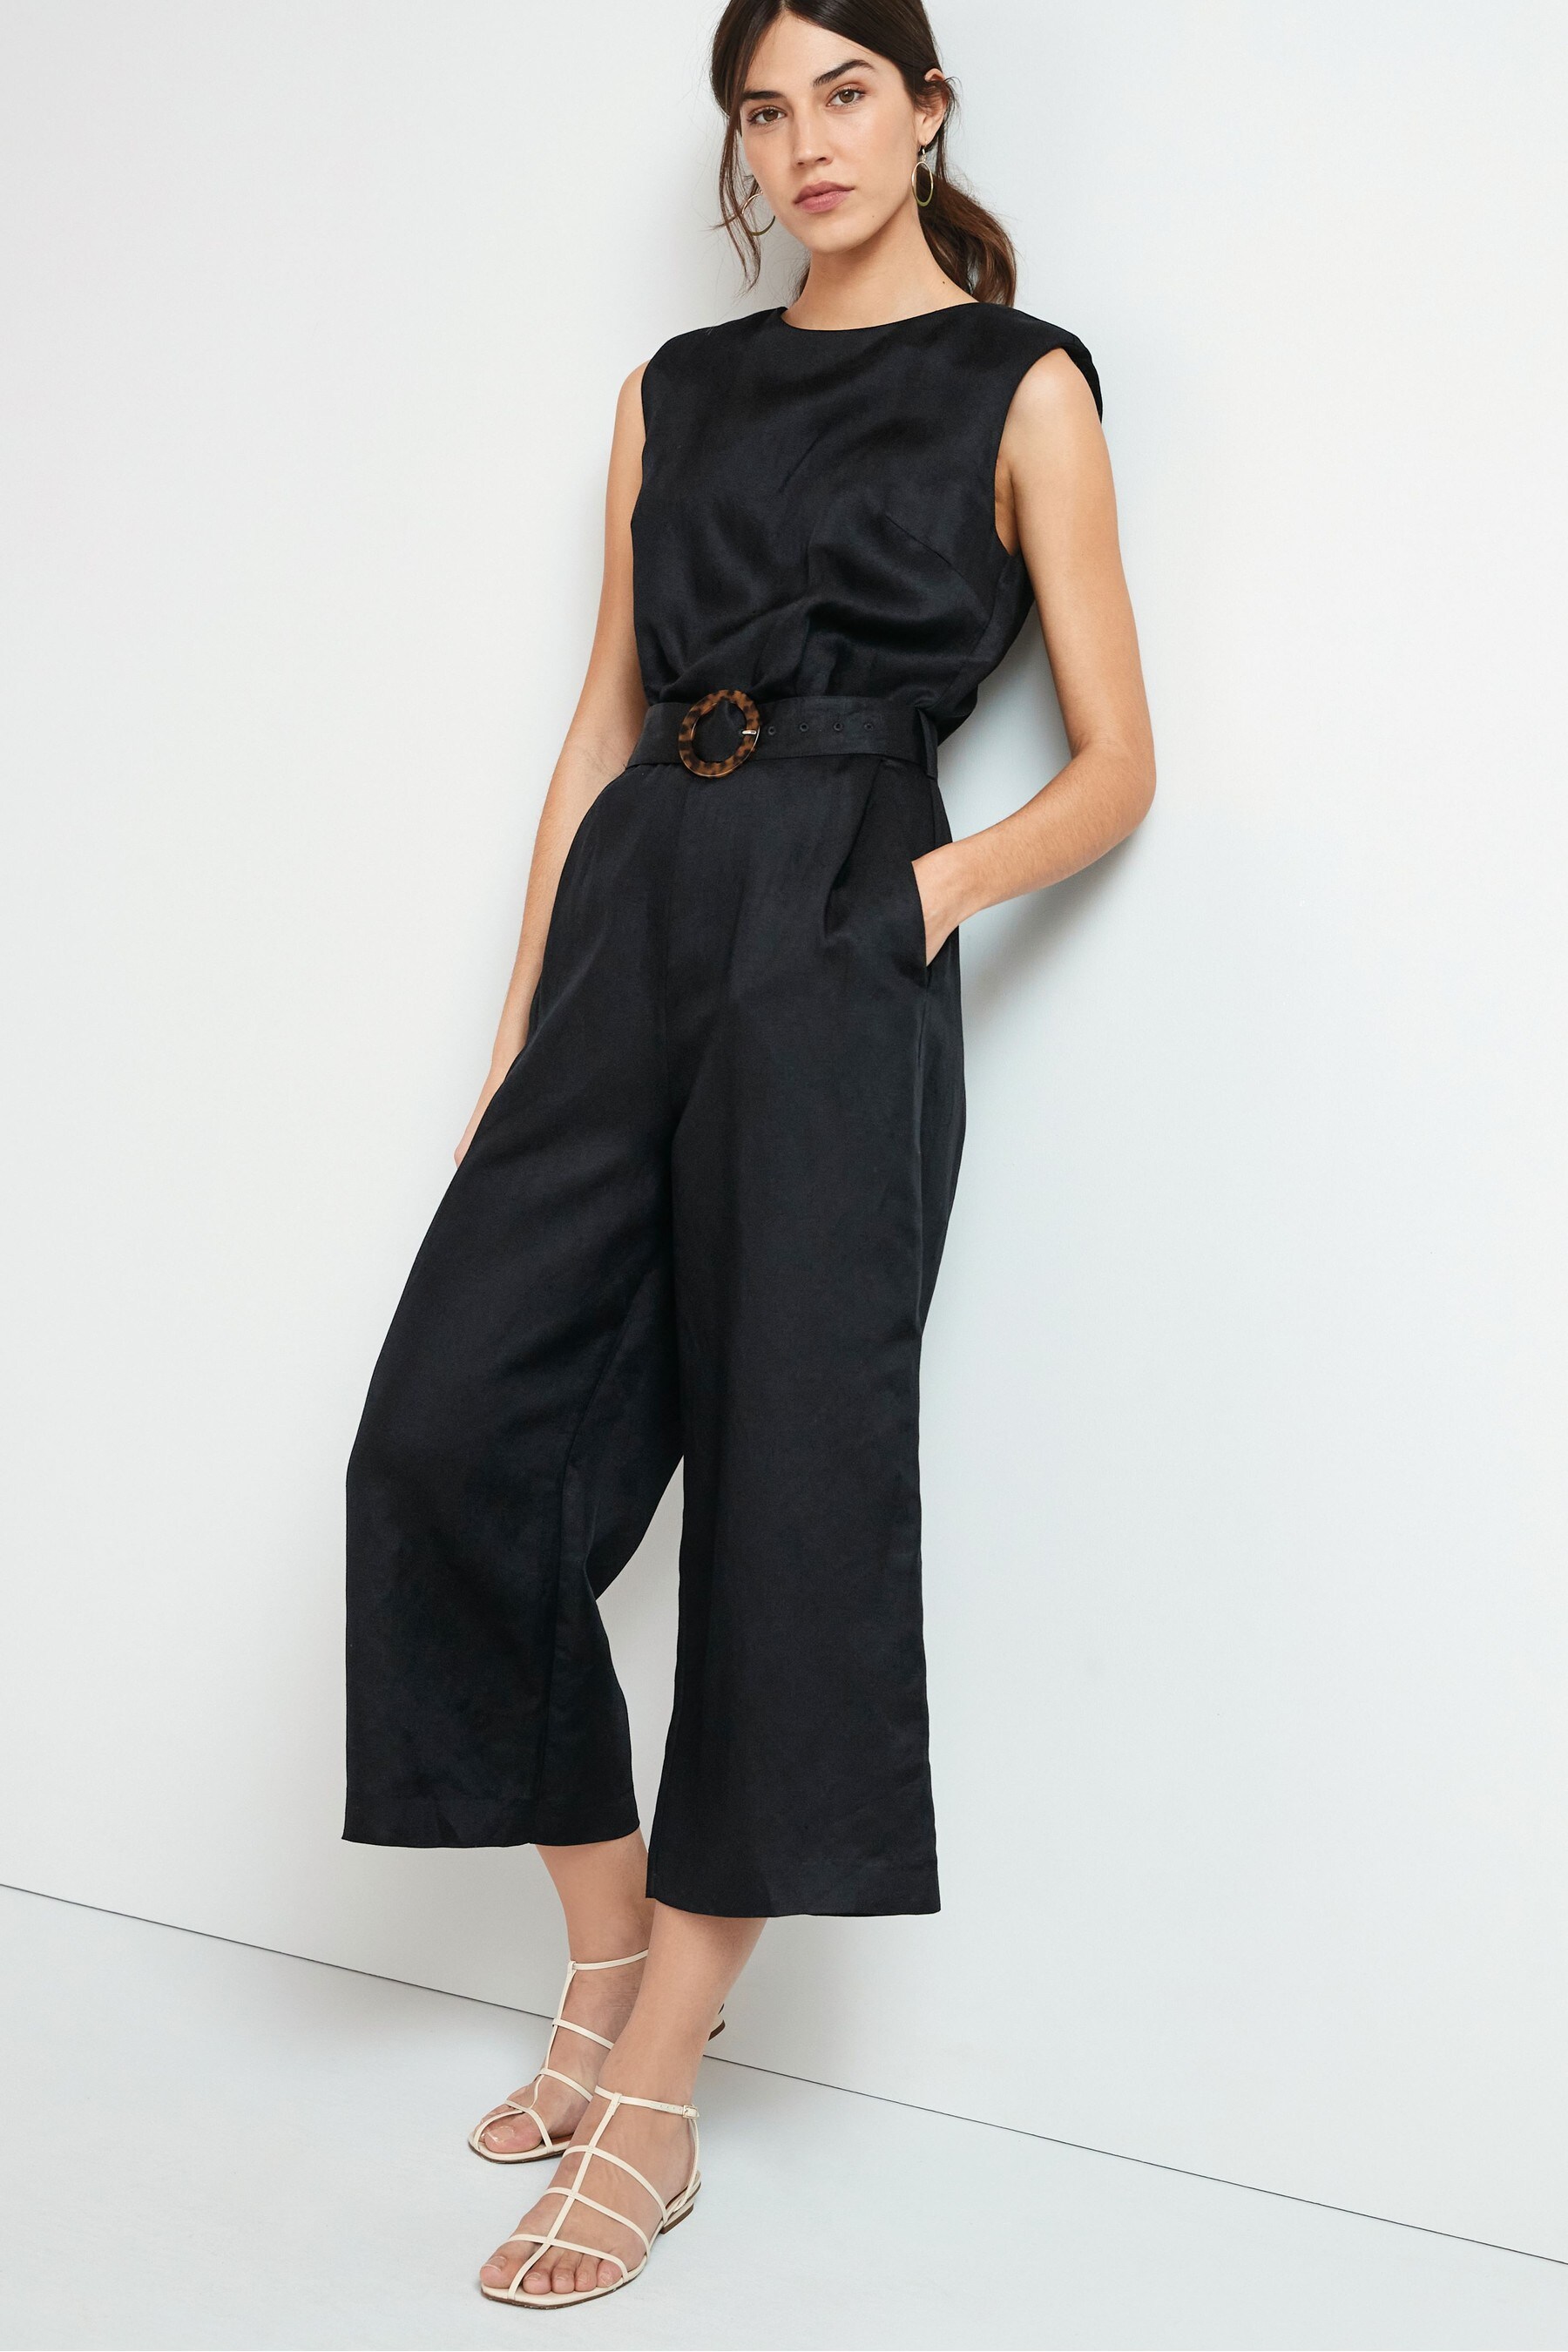 Buy Black Belted Jumpsuit from the Next UK online shop